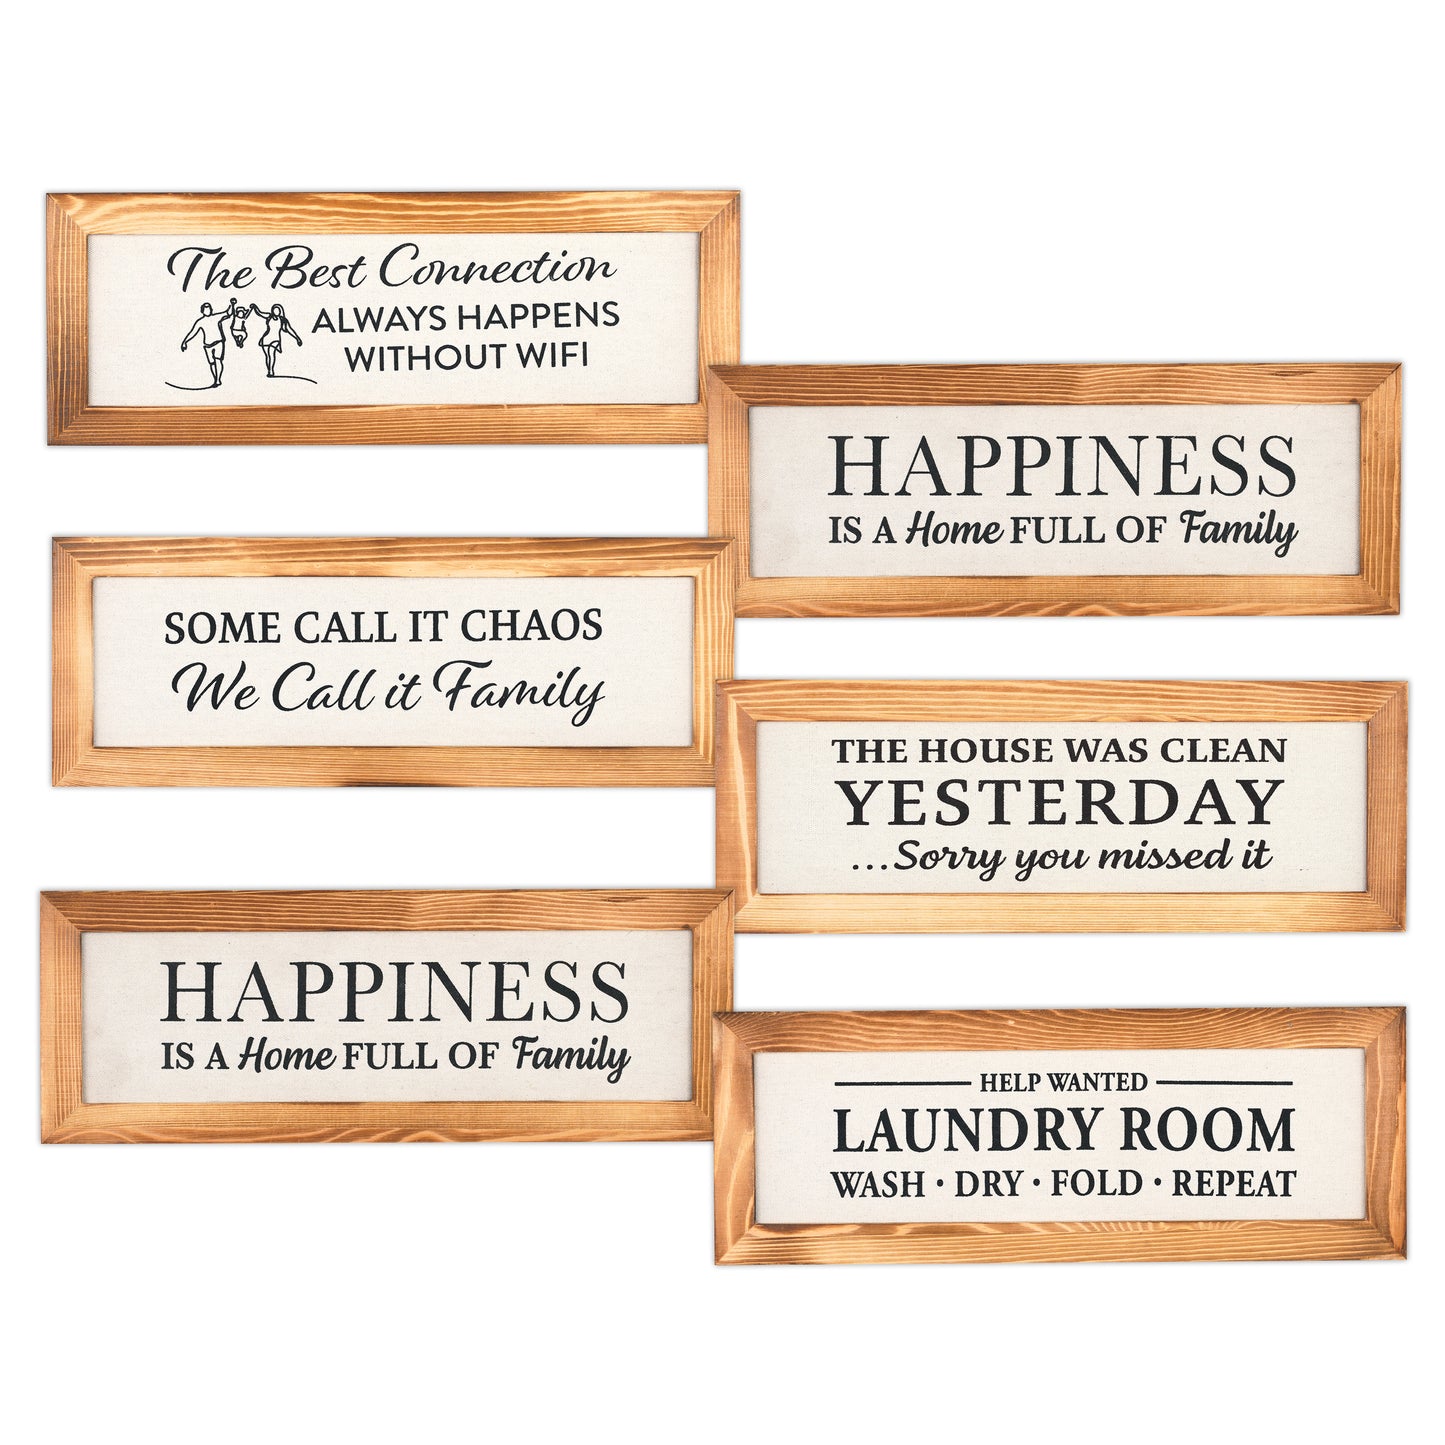 Help Wanted, Laundry Room - 16" x 6" Canvas Sign